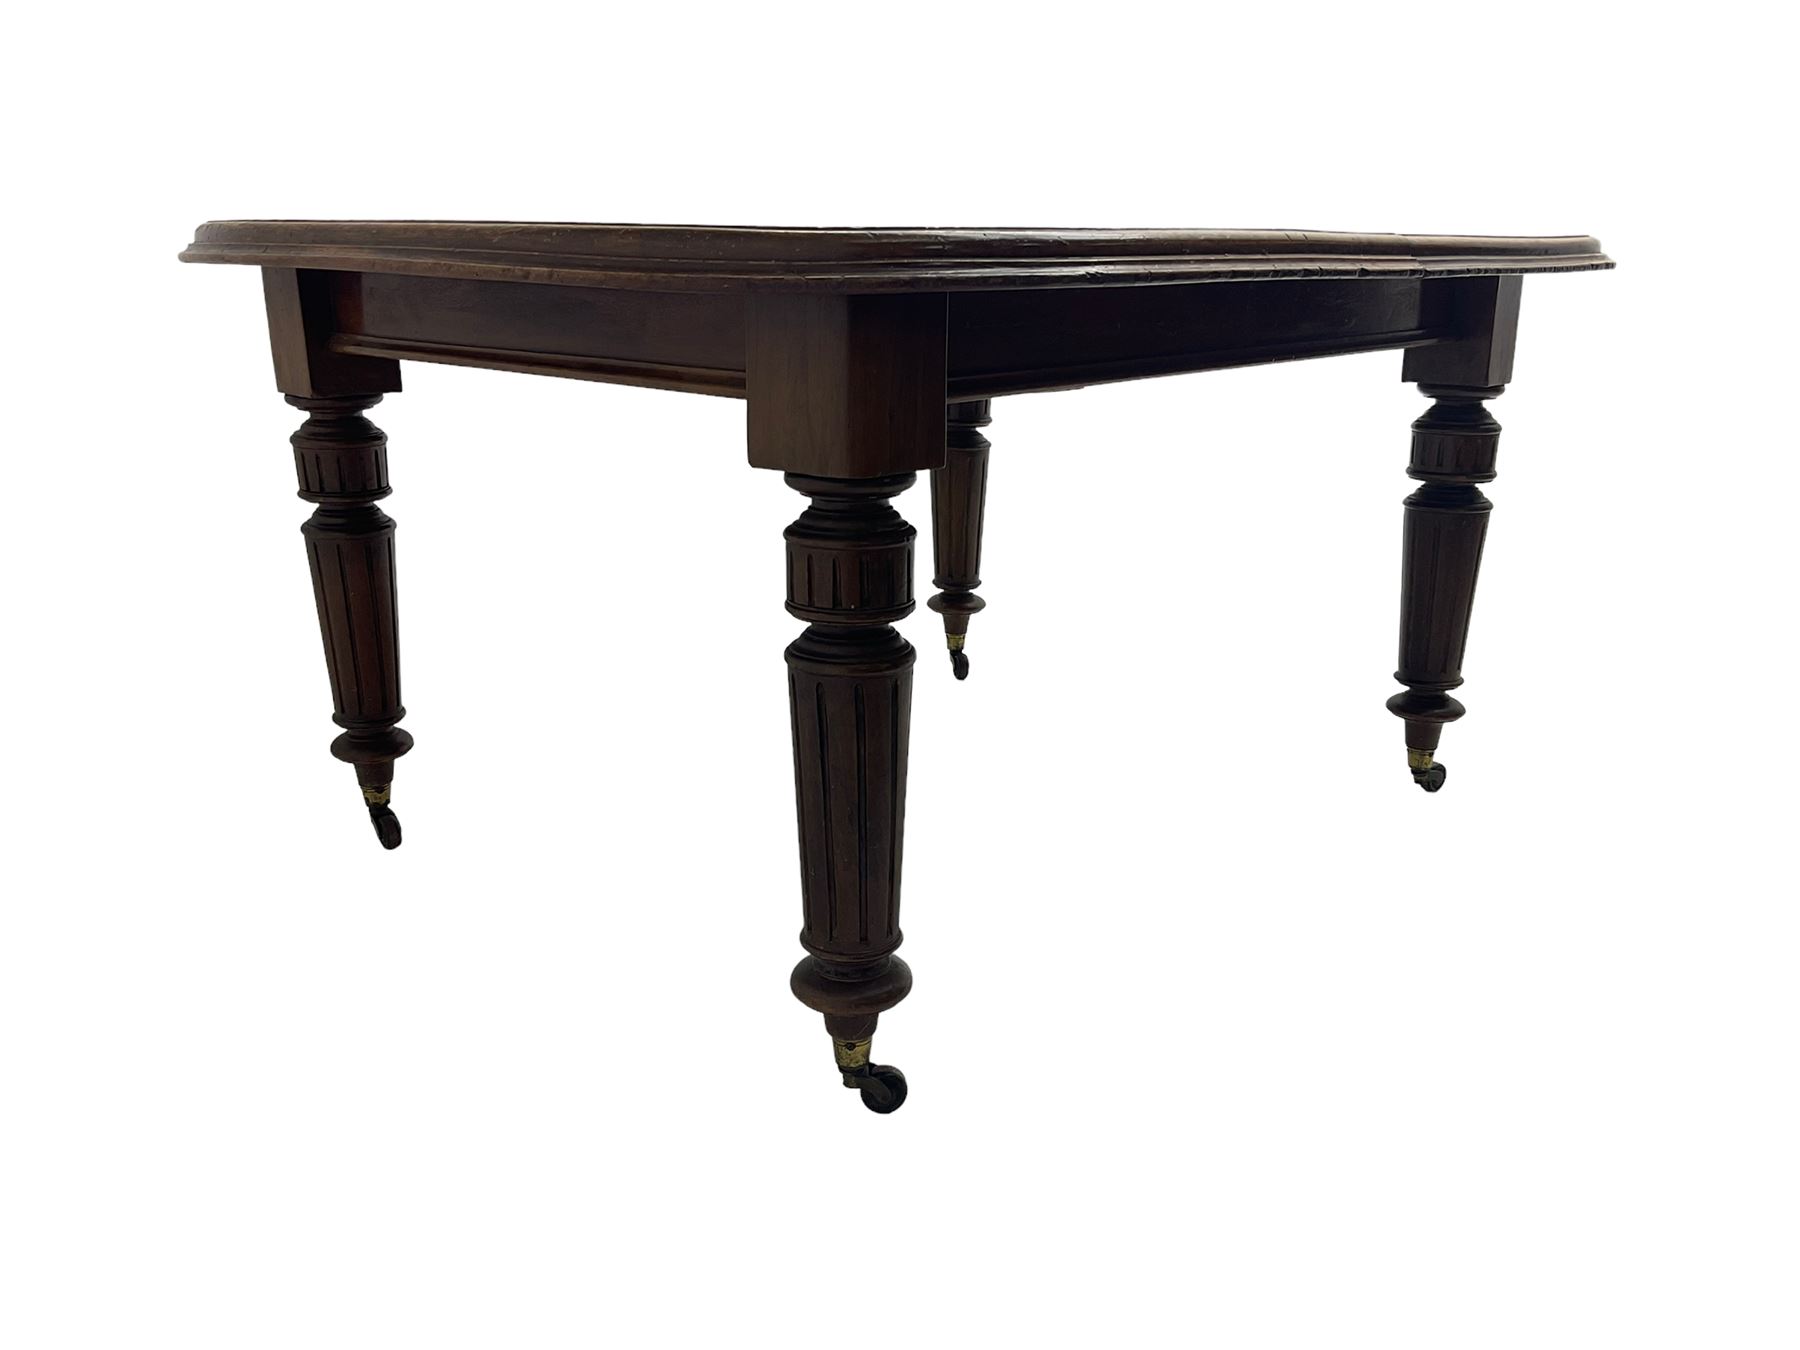 19th century mahogany extending dining table - Image 5 of 6